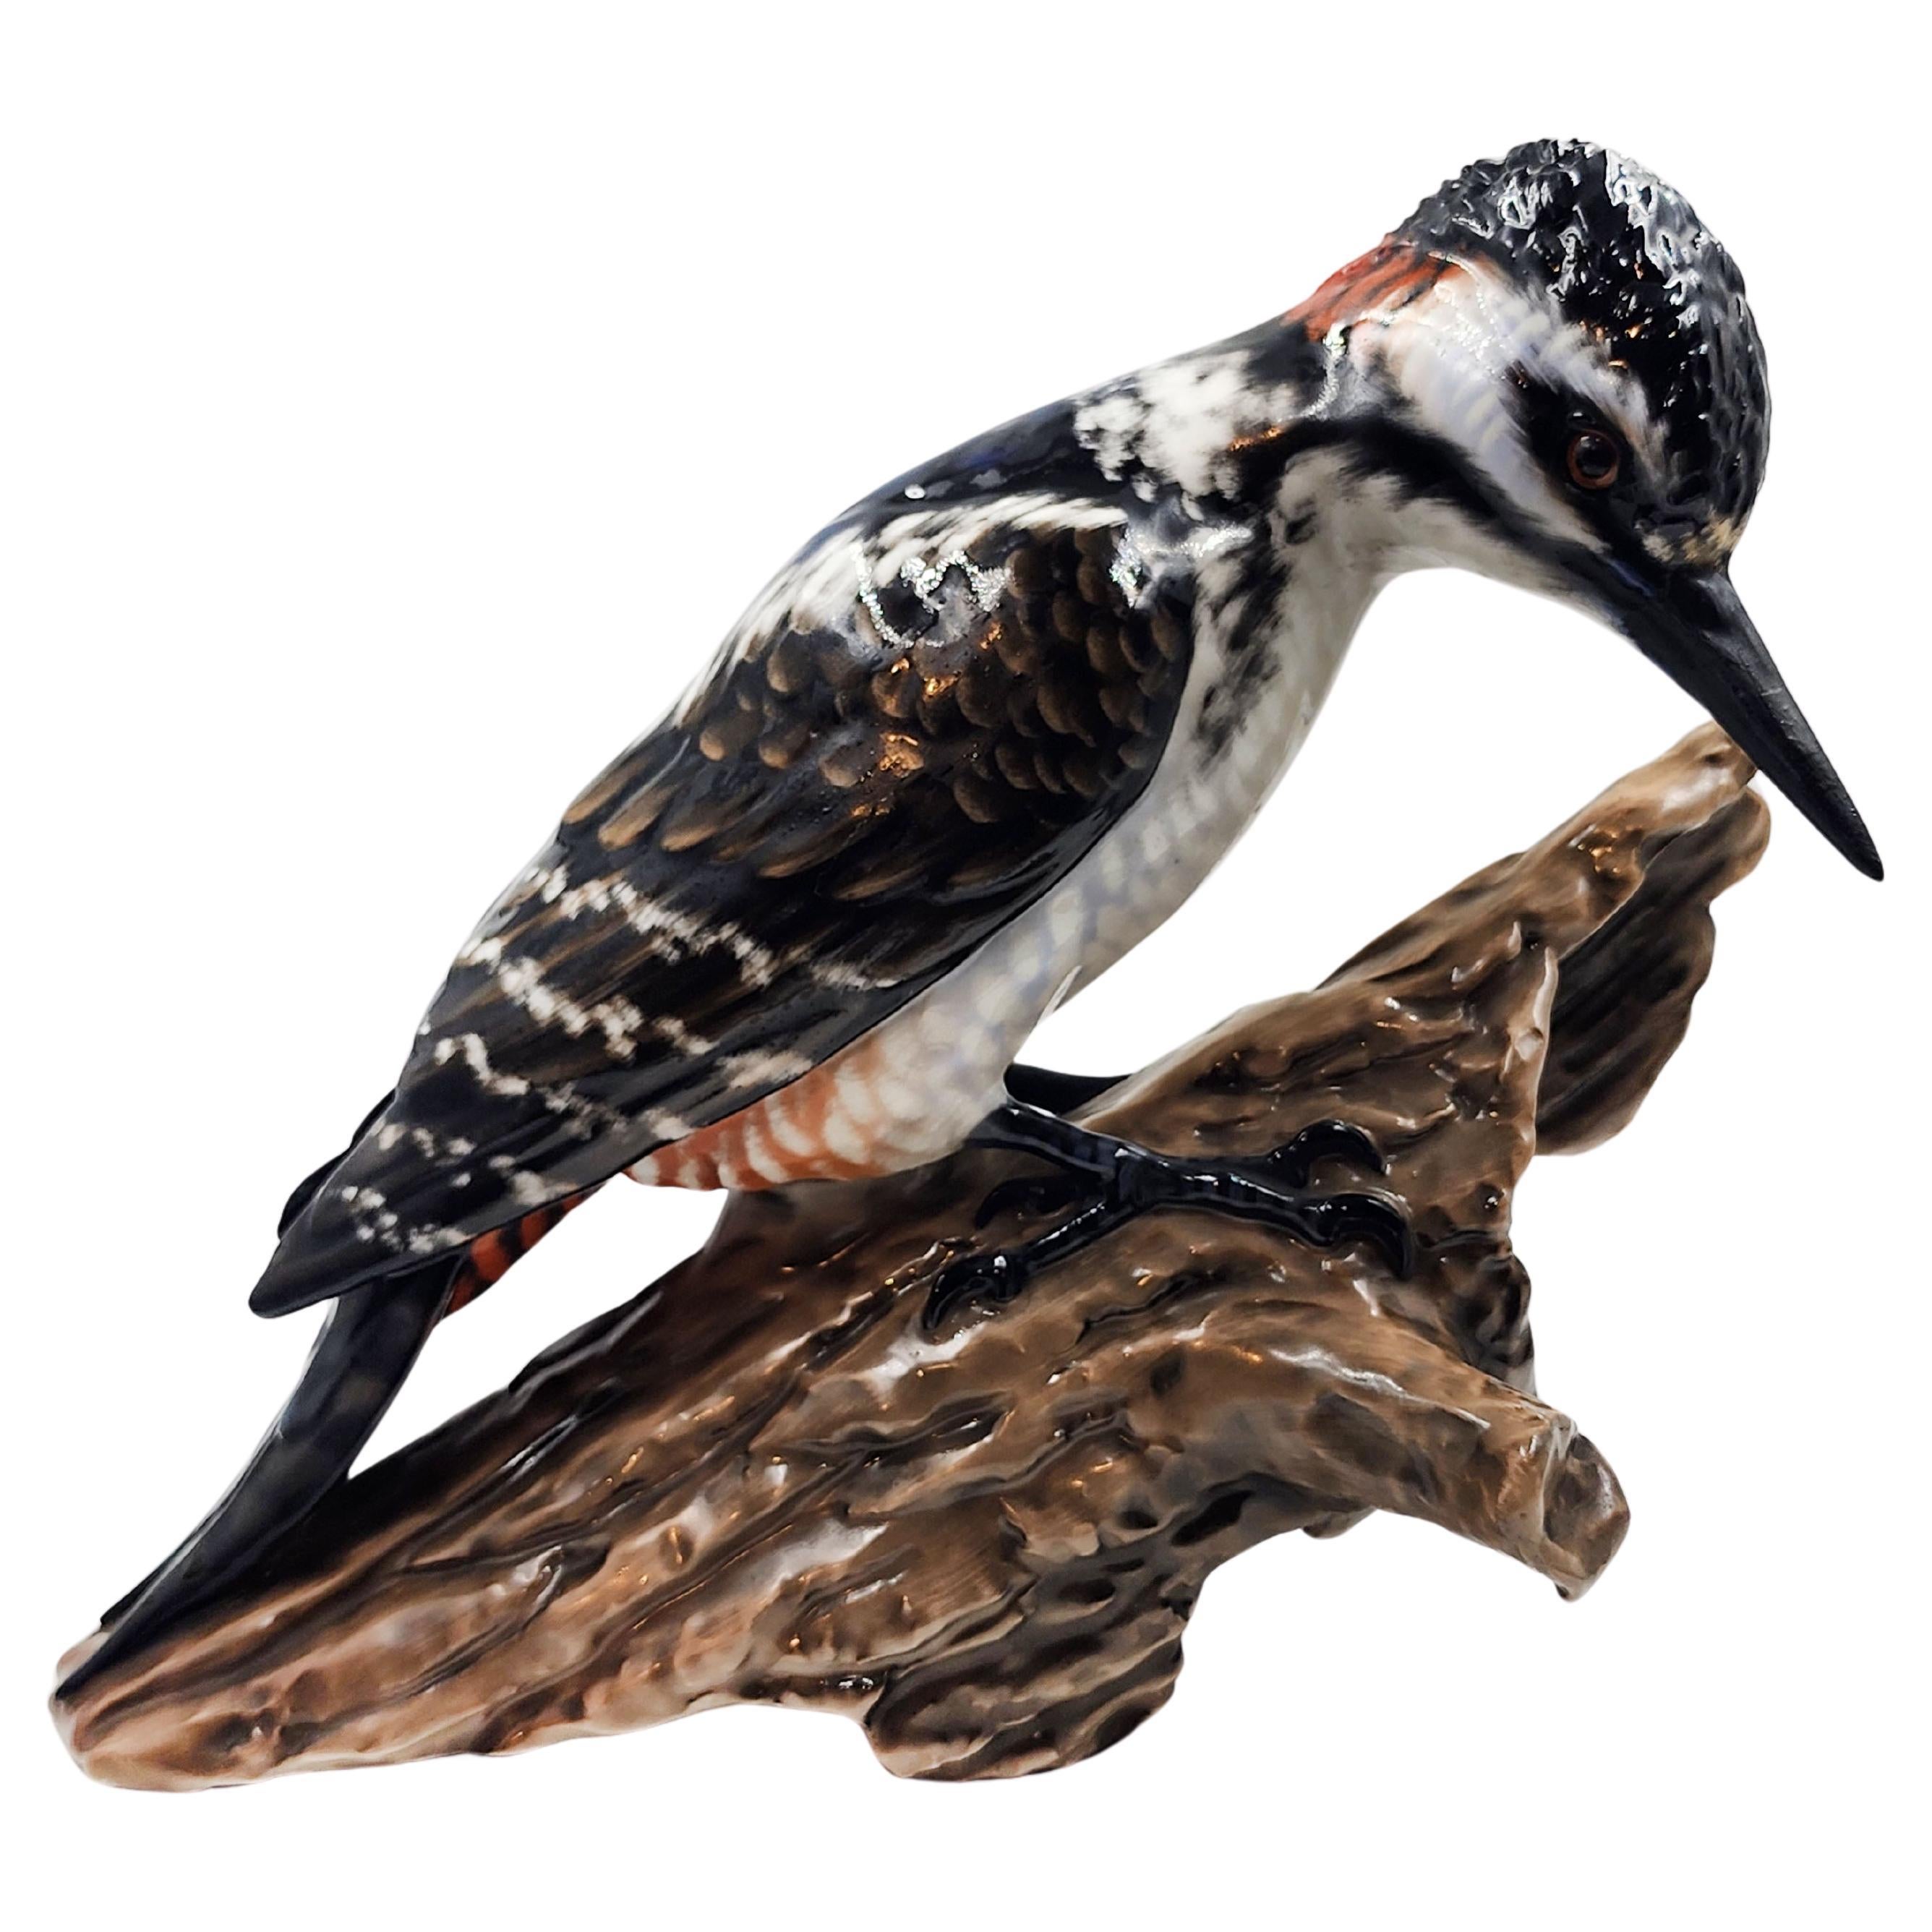 Porcelain and hand-painted figurine of a realistic Rosenthal bird